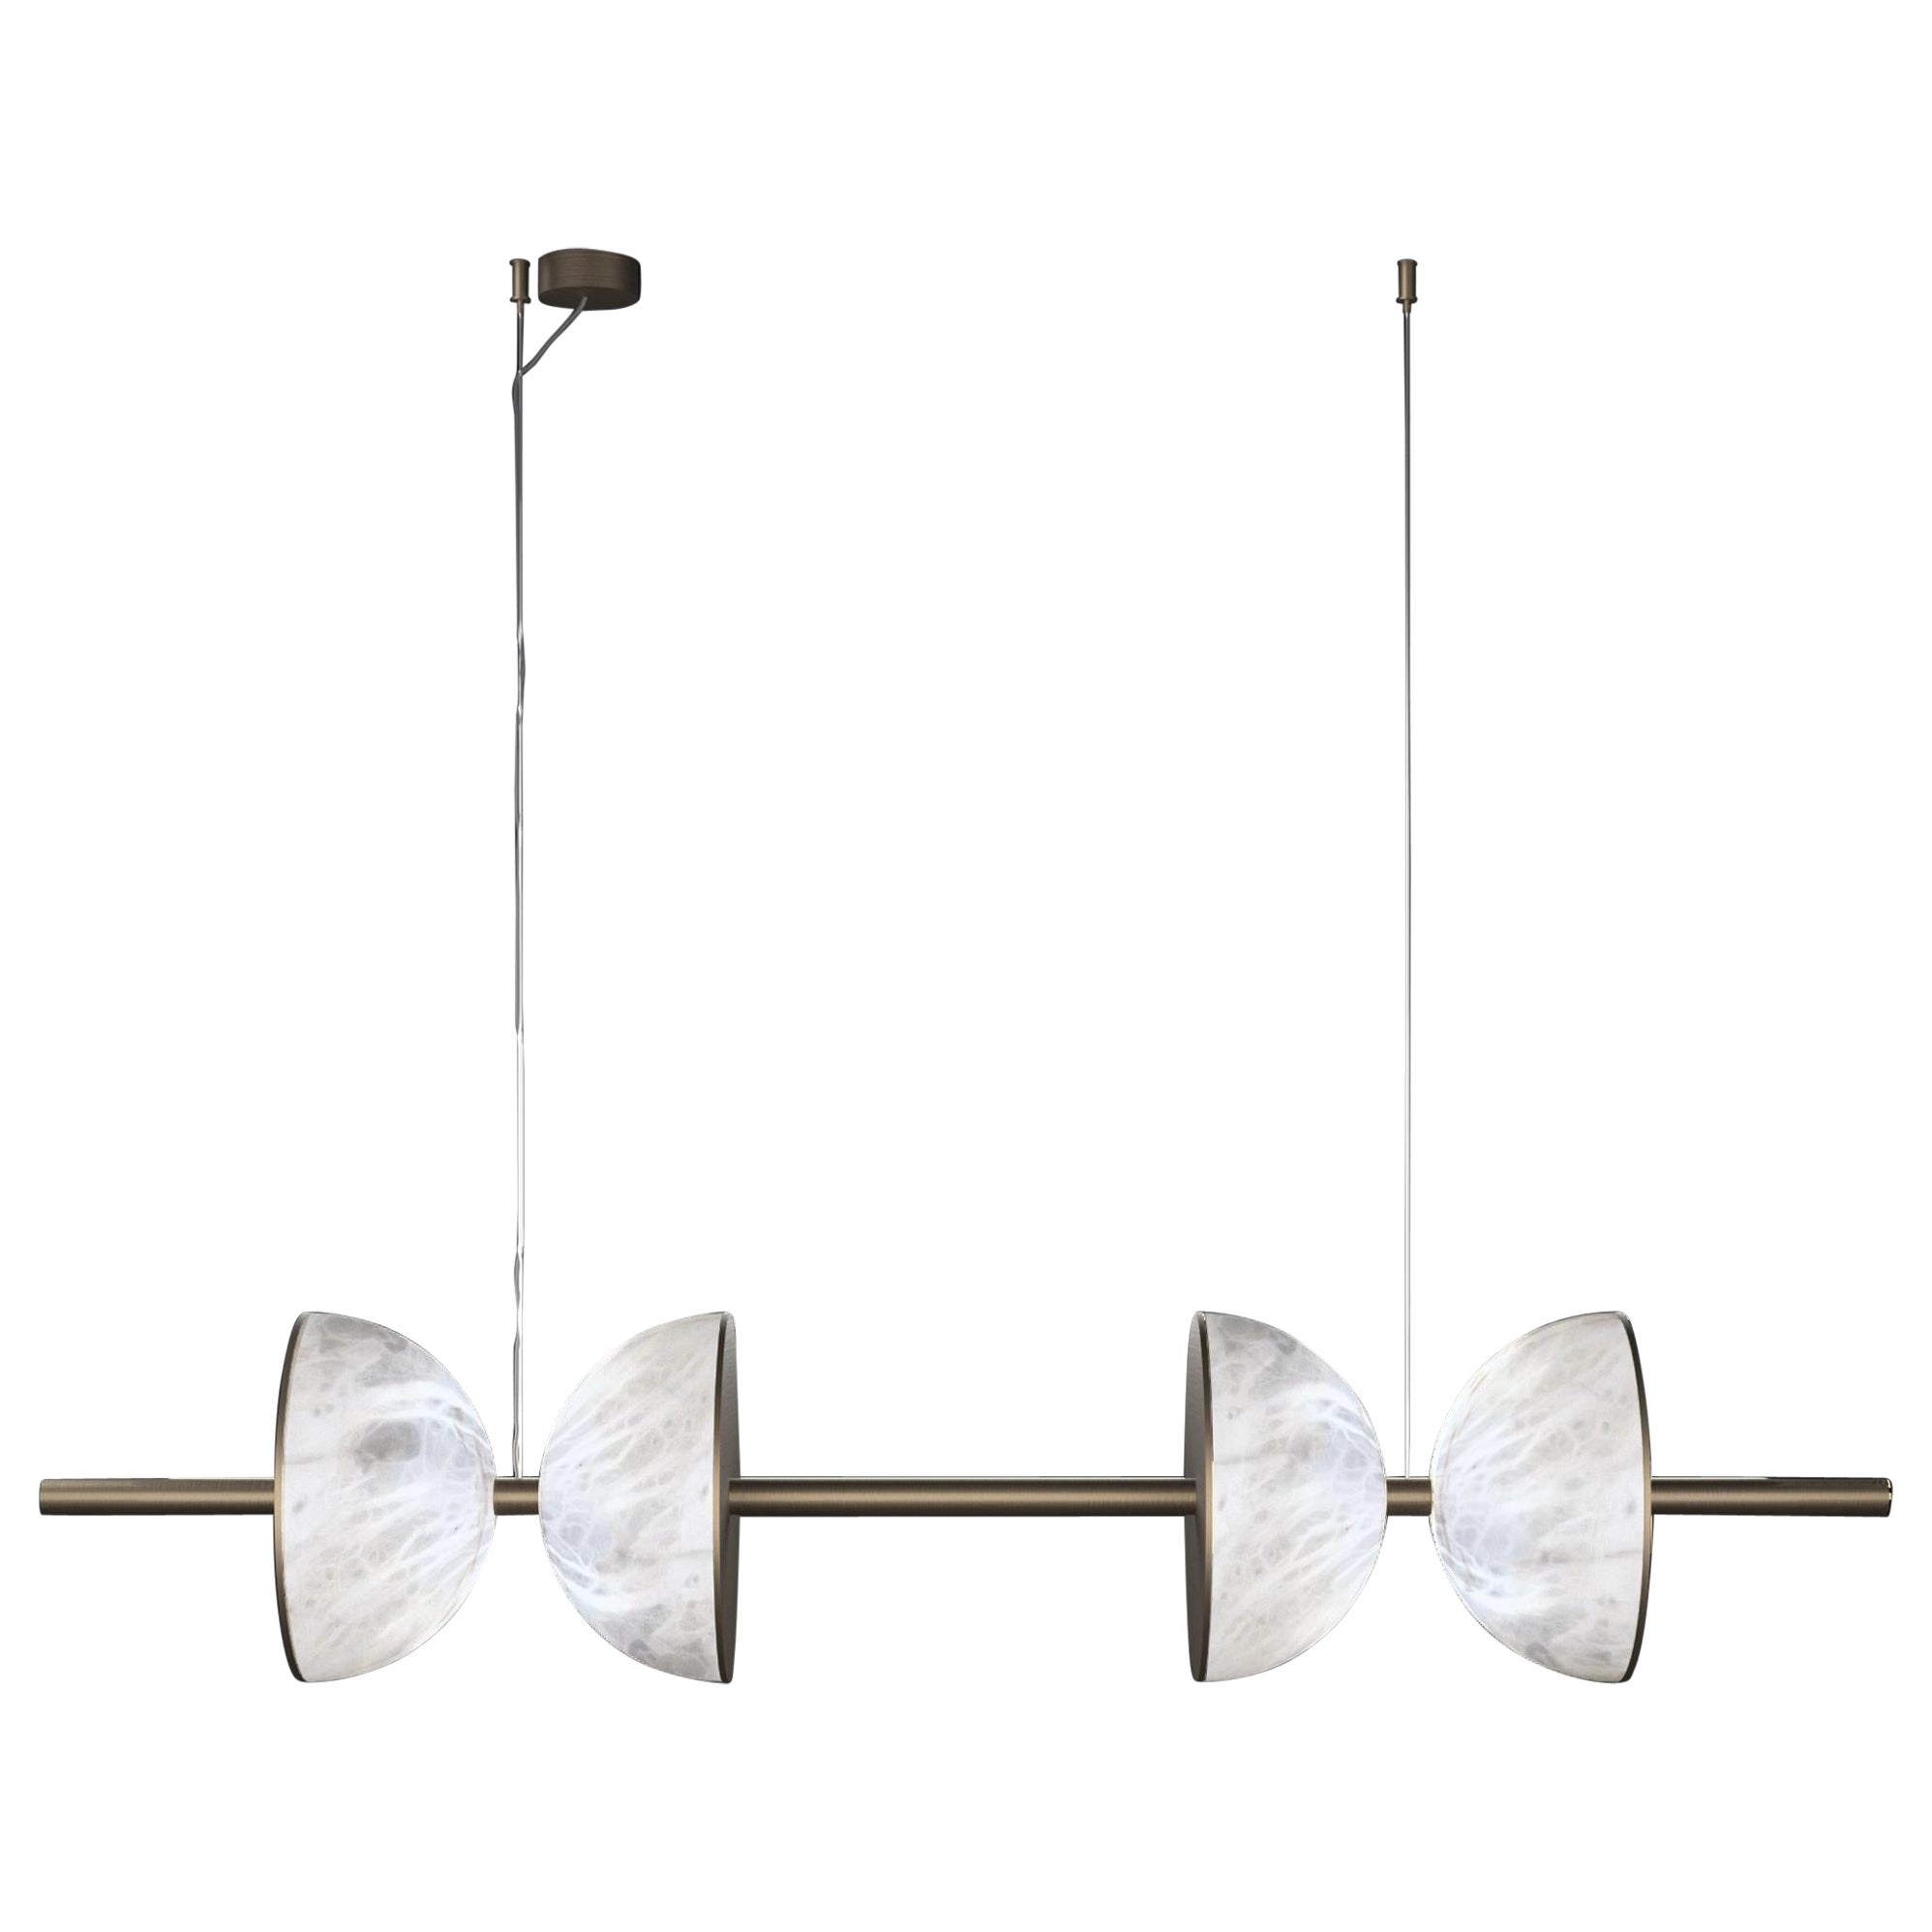 Ermes Burnished Metal And Alabaster Pendant Light 2 by Alabastro Italiano For Sale